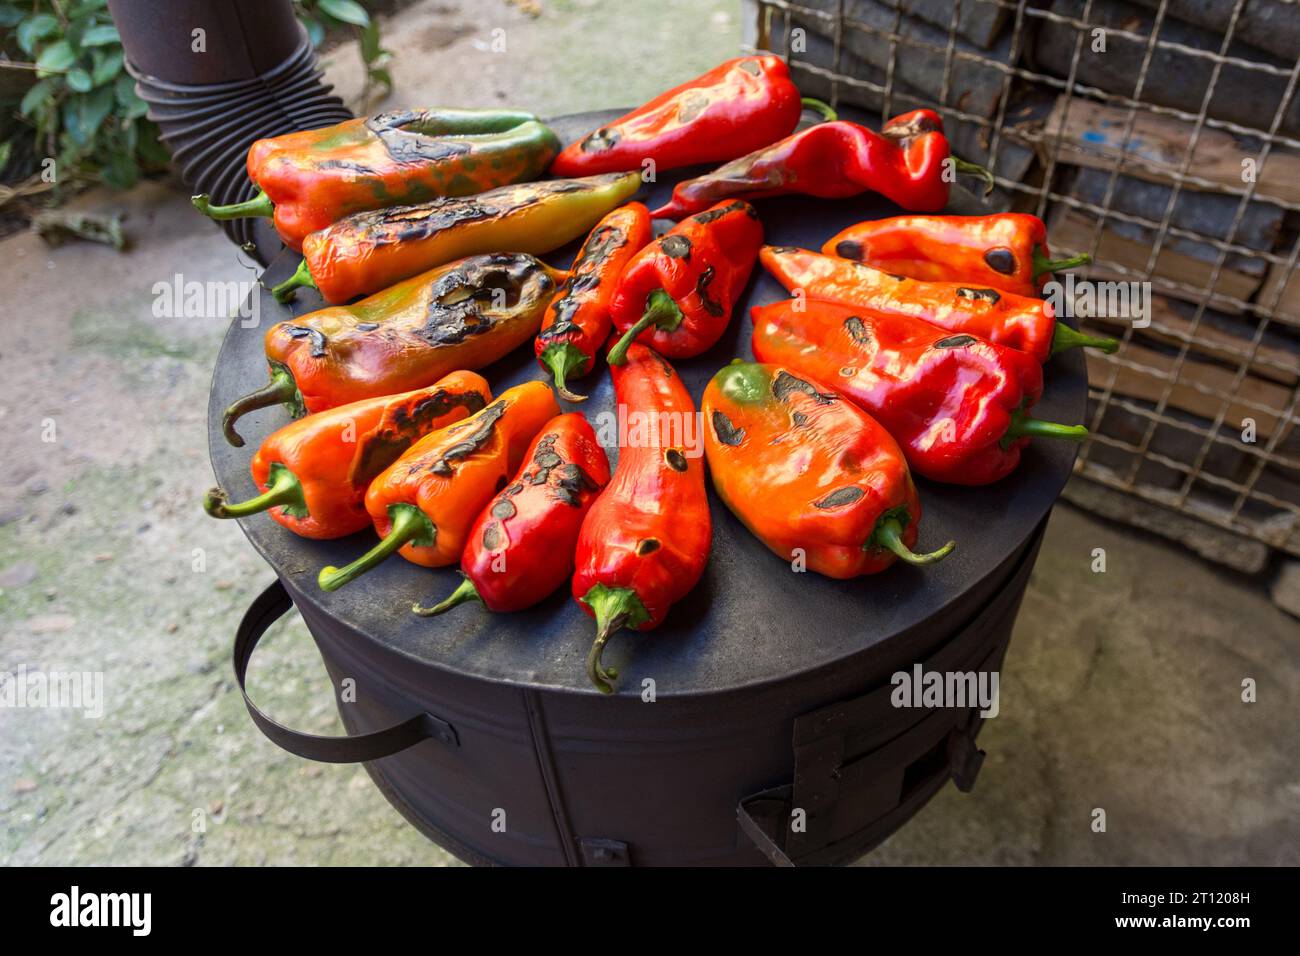 Peppers arranged on the wood fired stove burner, showing their roasted color from above. The process of roasting peppers on an autumn day in the yard Stock Photo